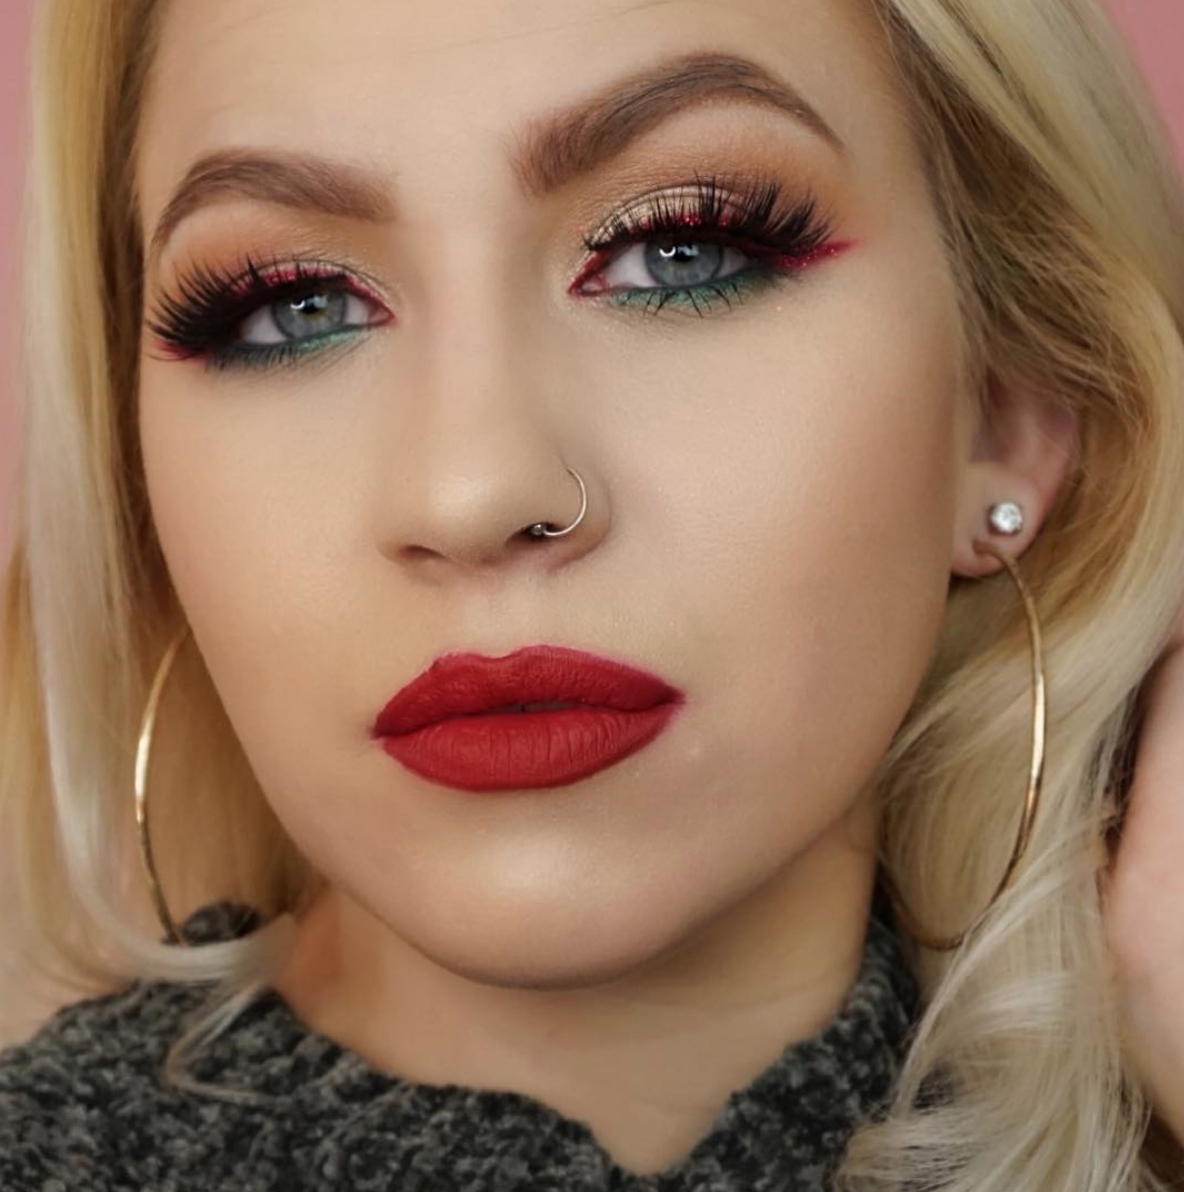 20 Instagram Beauty Gurus And Influencers To Follow In 2019